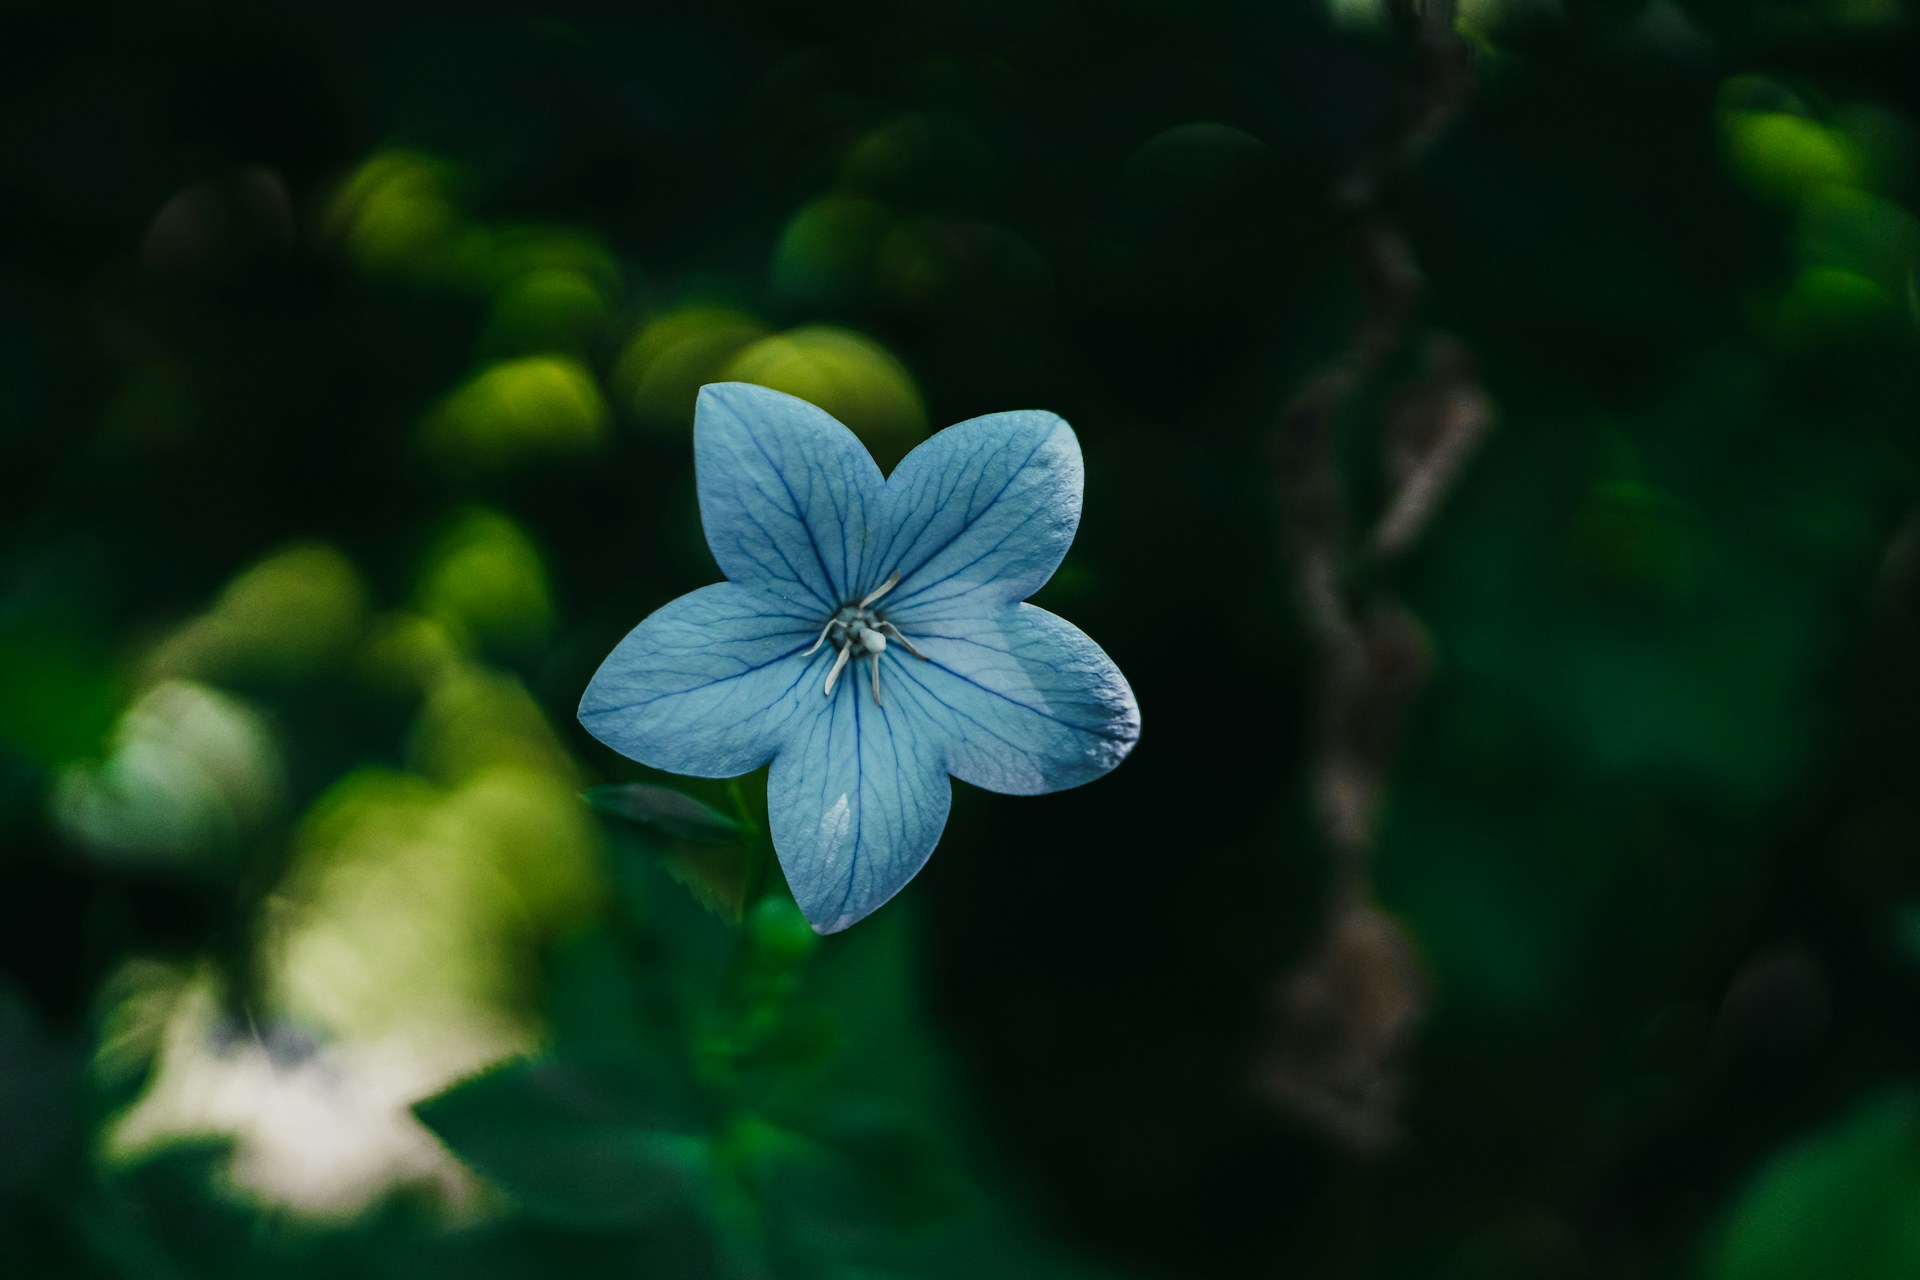 Green and Blue Floral Wallpaper 1920x1280